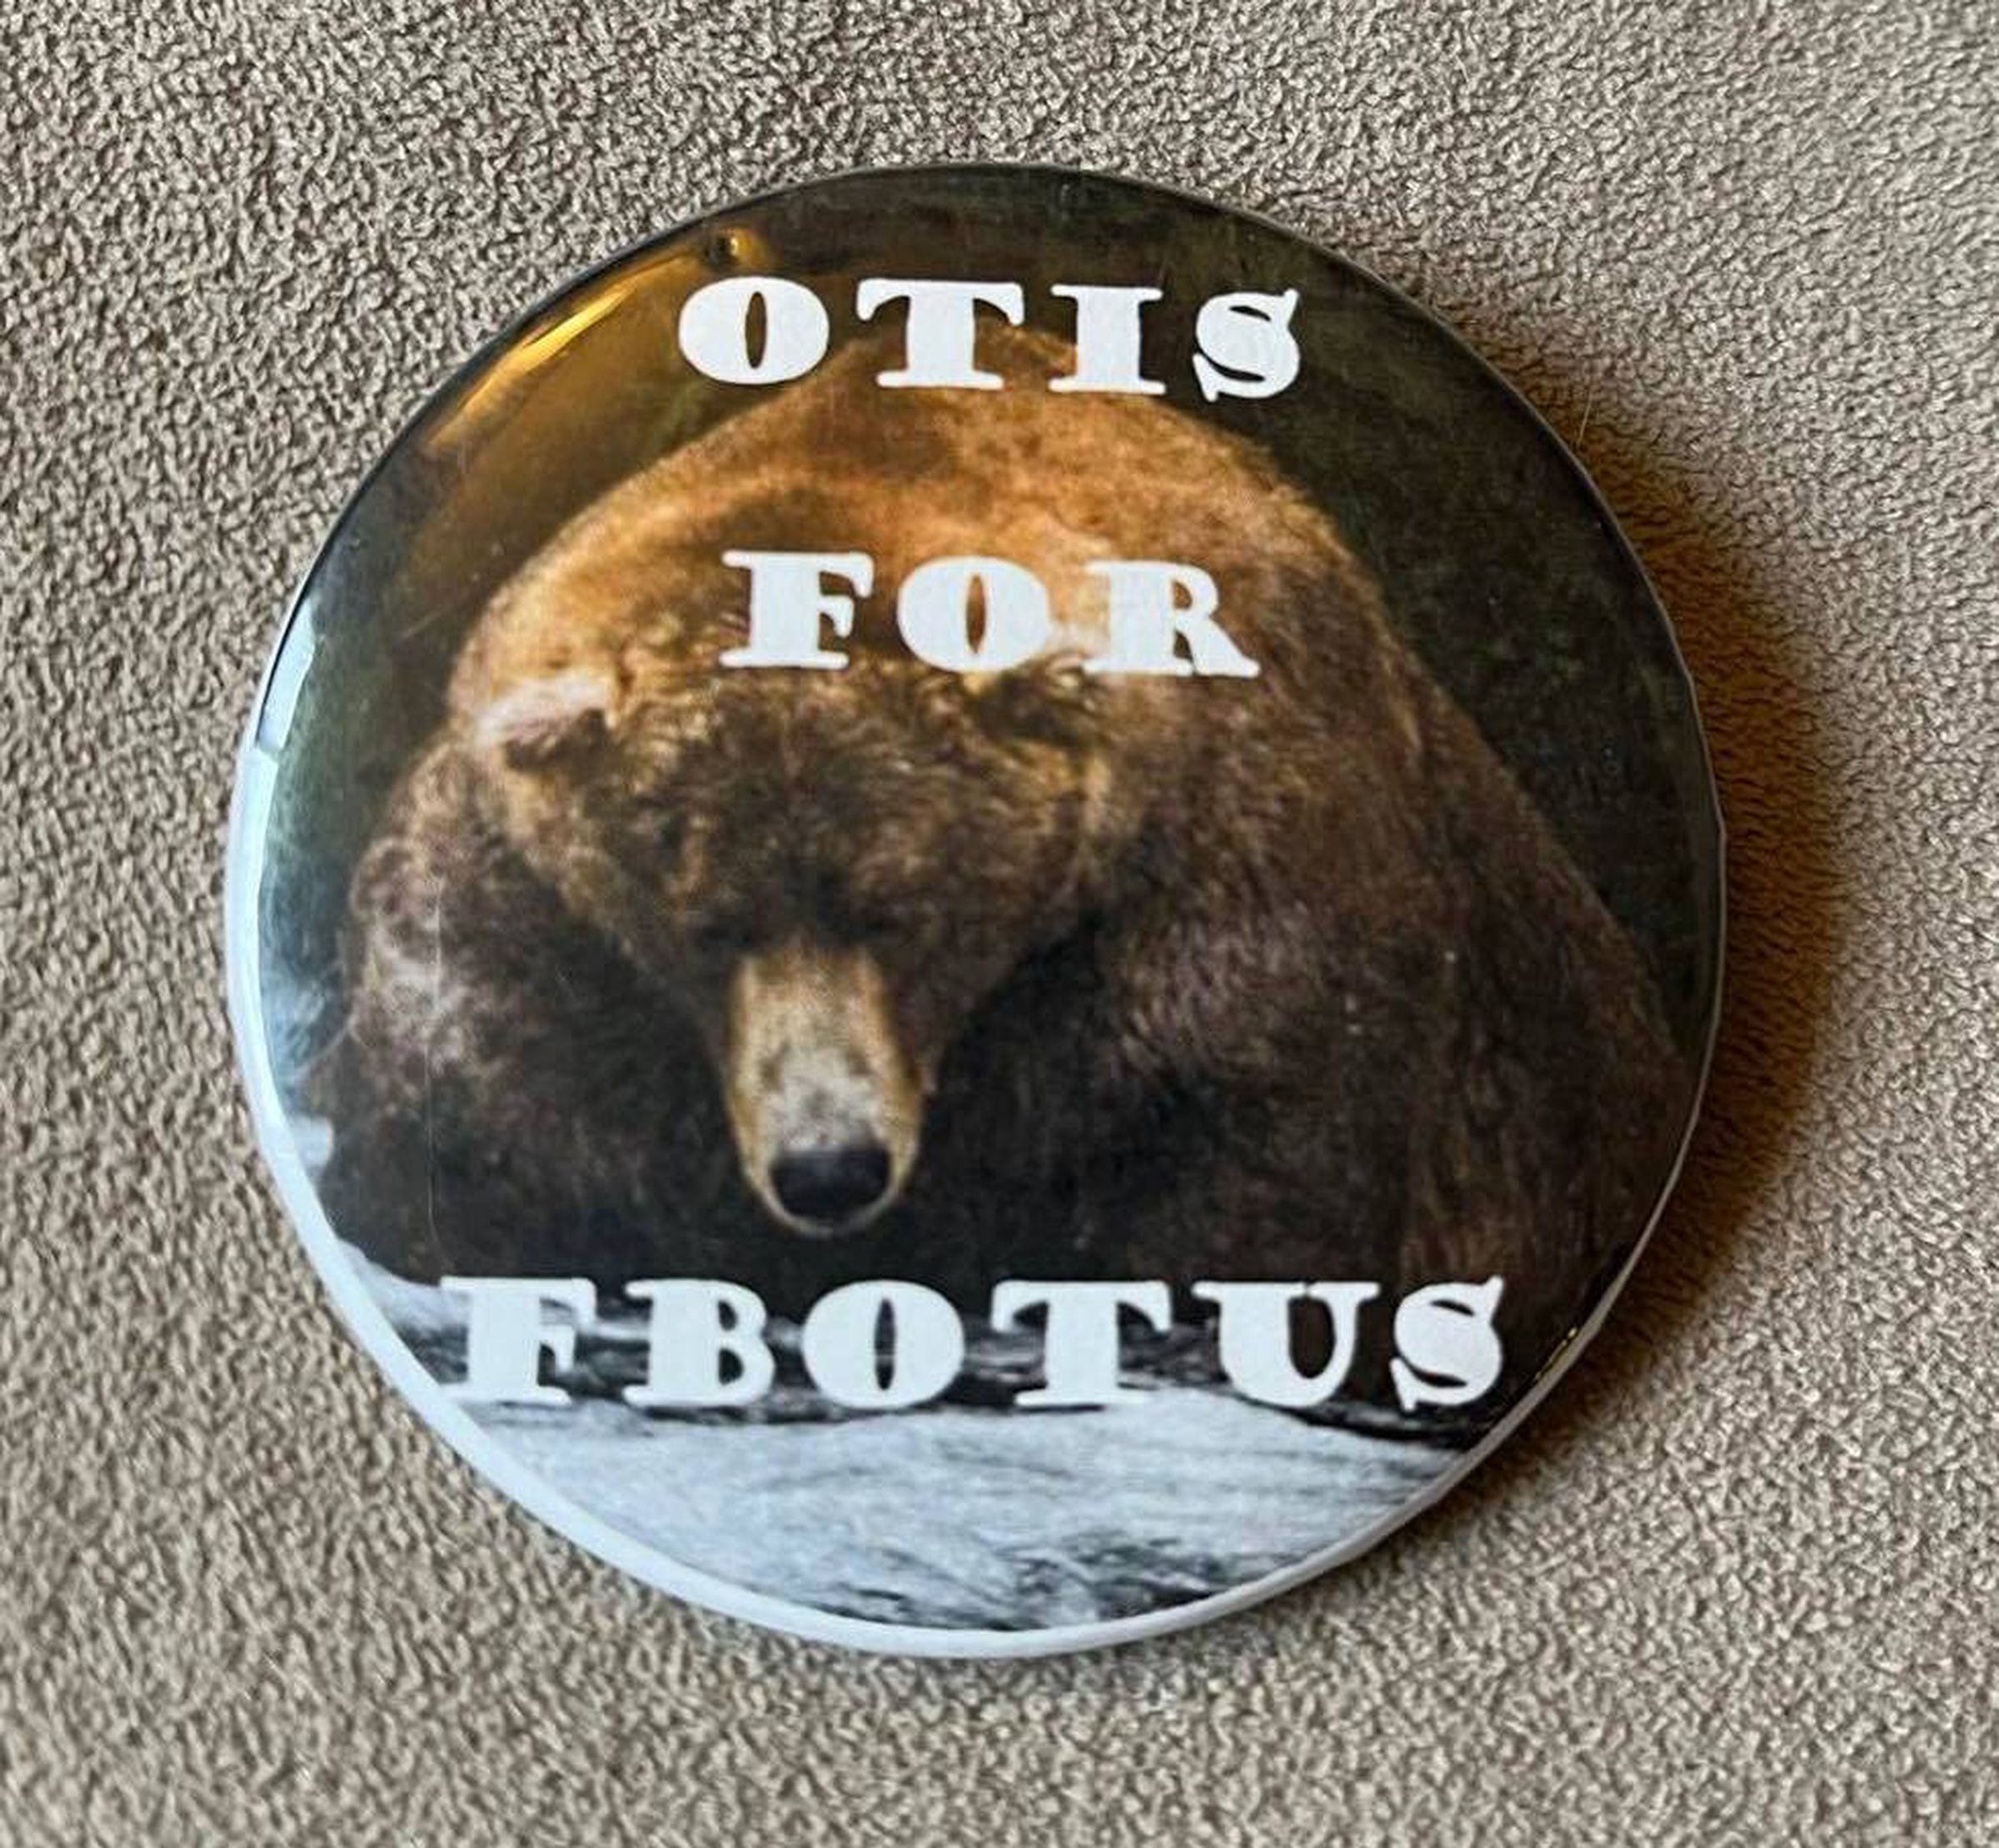 A button with a photo of a large brown bear, Otis, that reads “OTIS FOR FBOTUS.”